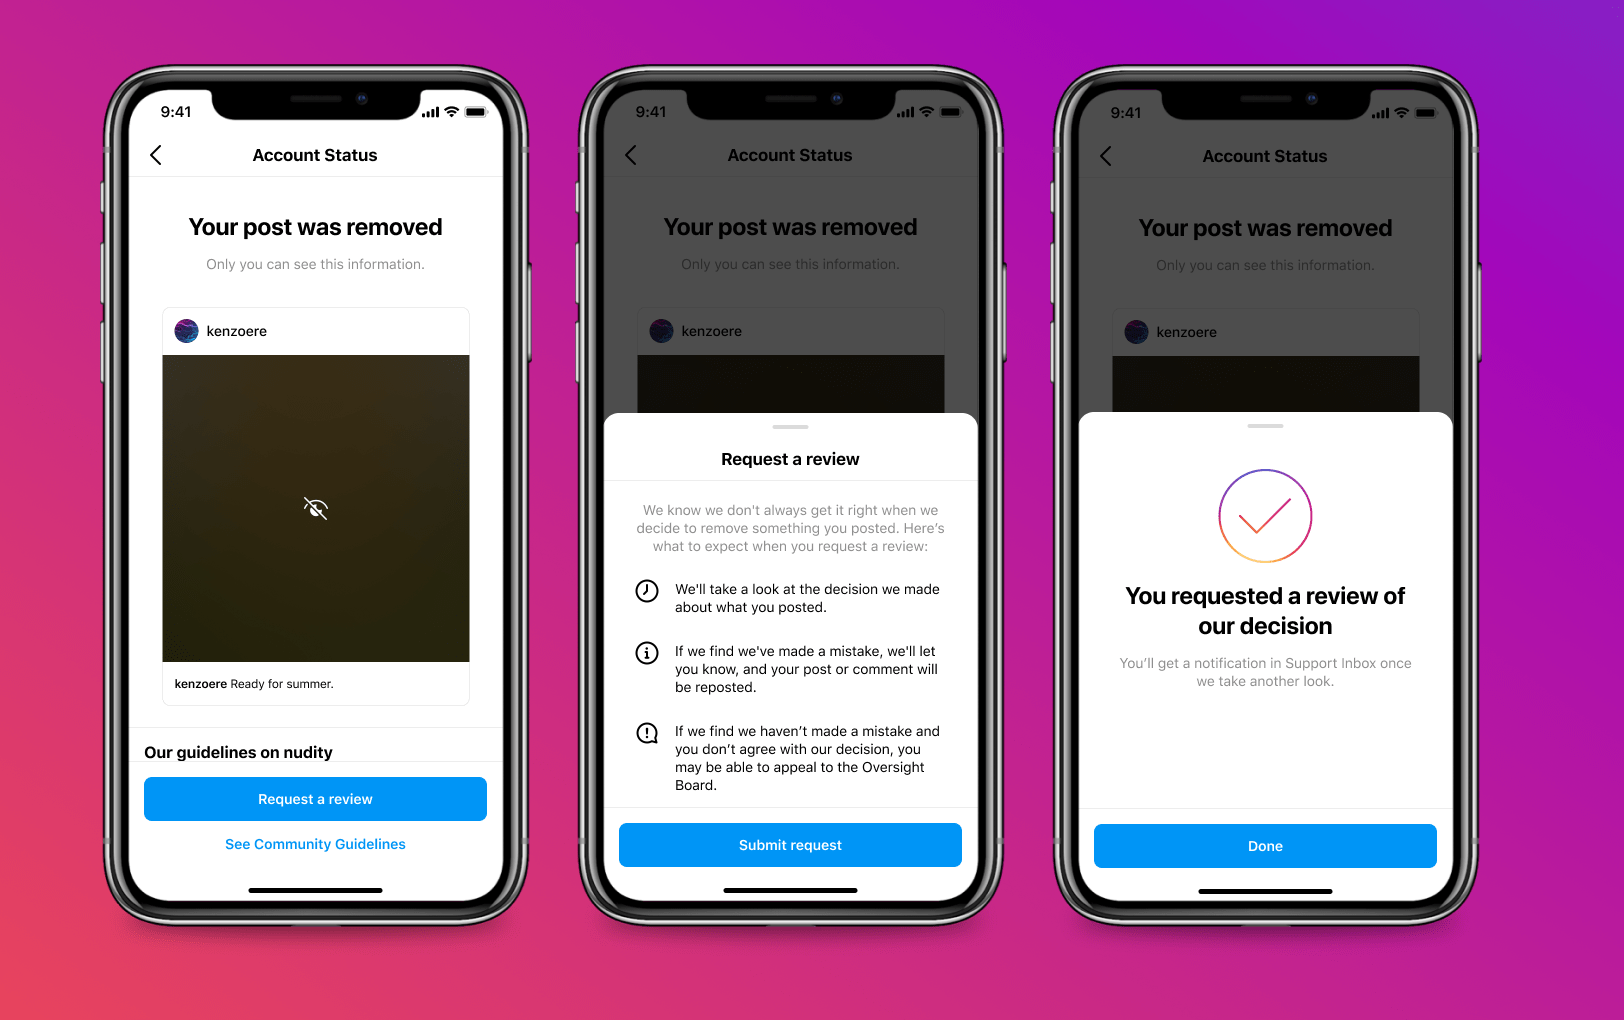 Instagram "Your post was removed" review request